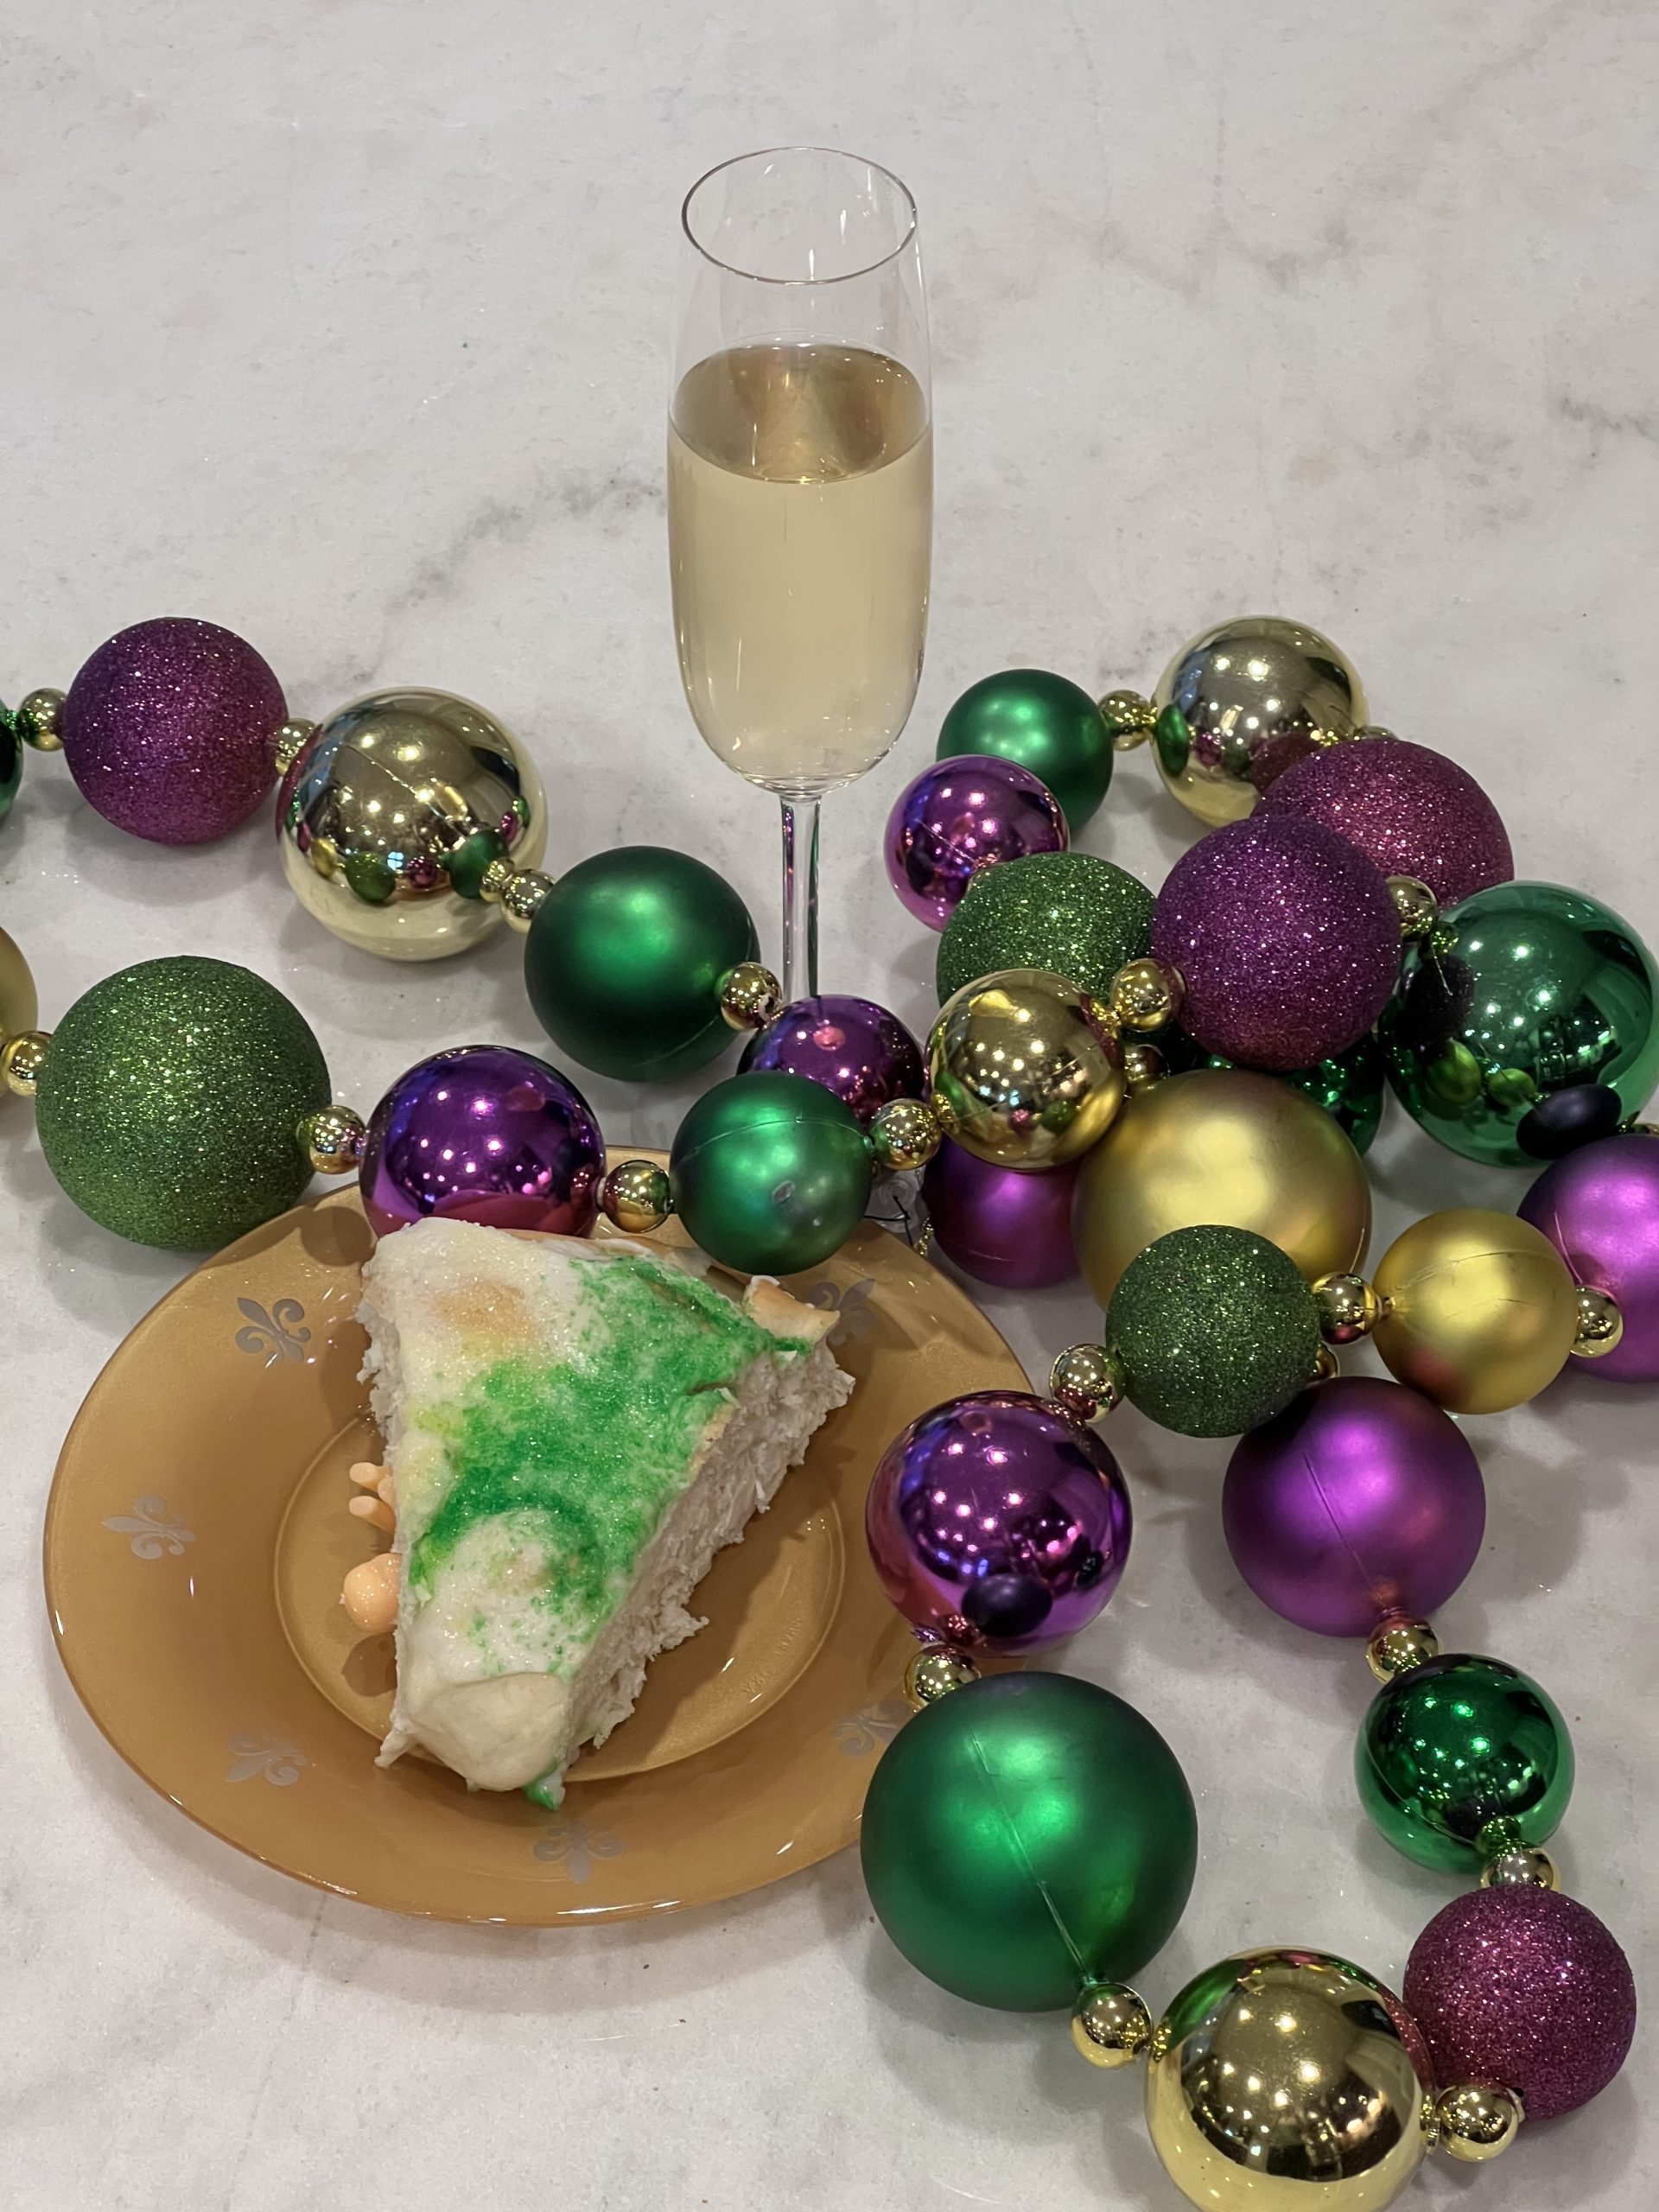 slice of King Cake on a plate surrounded by Mardi Gras beads and a glass of champagne